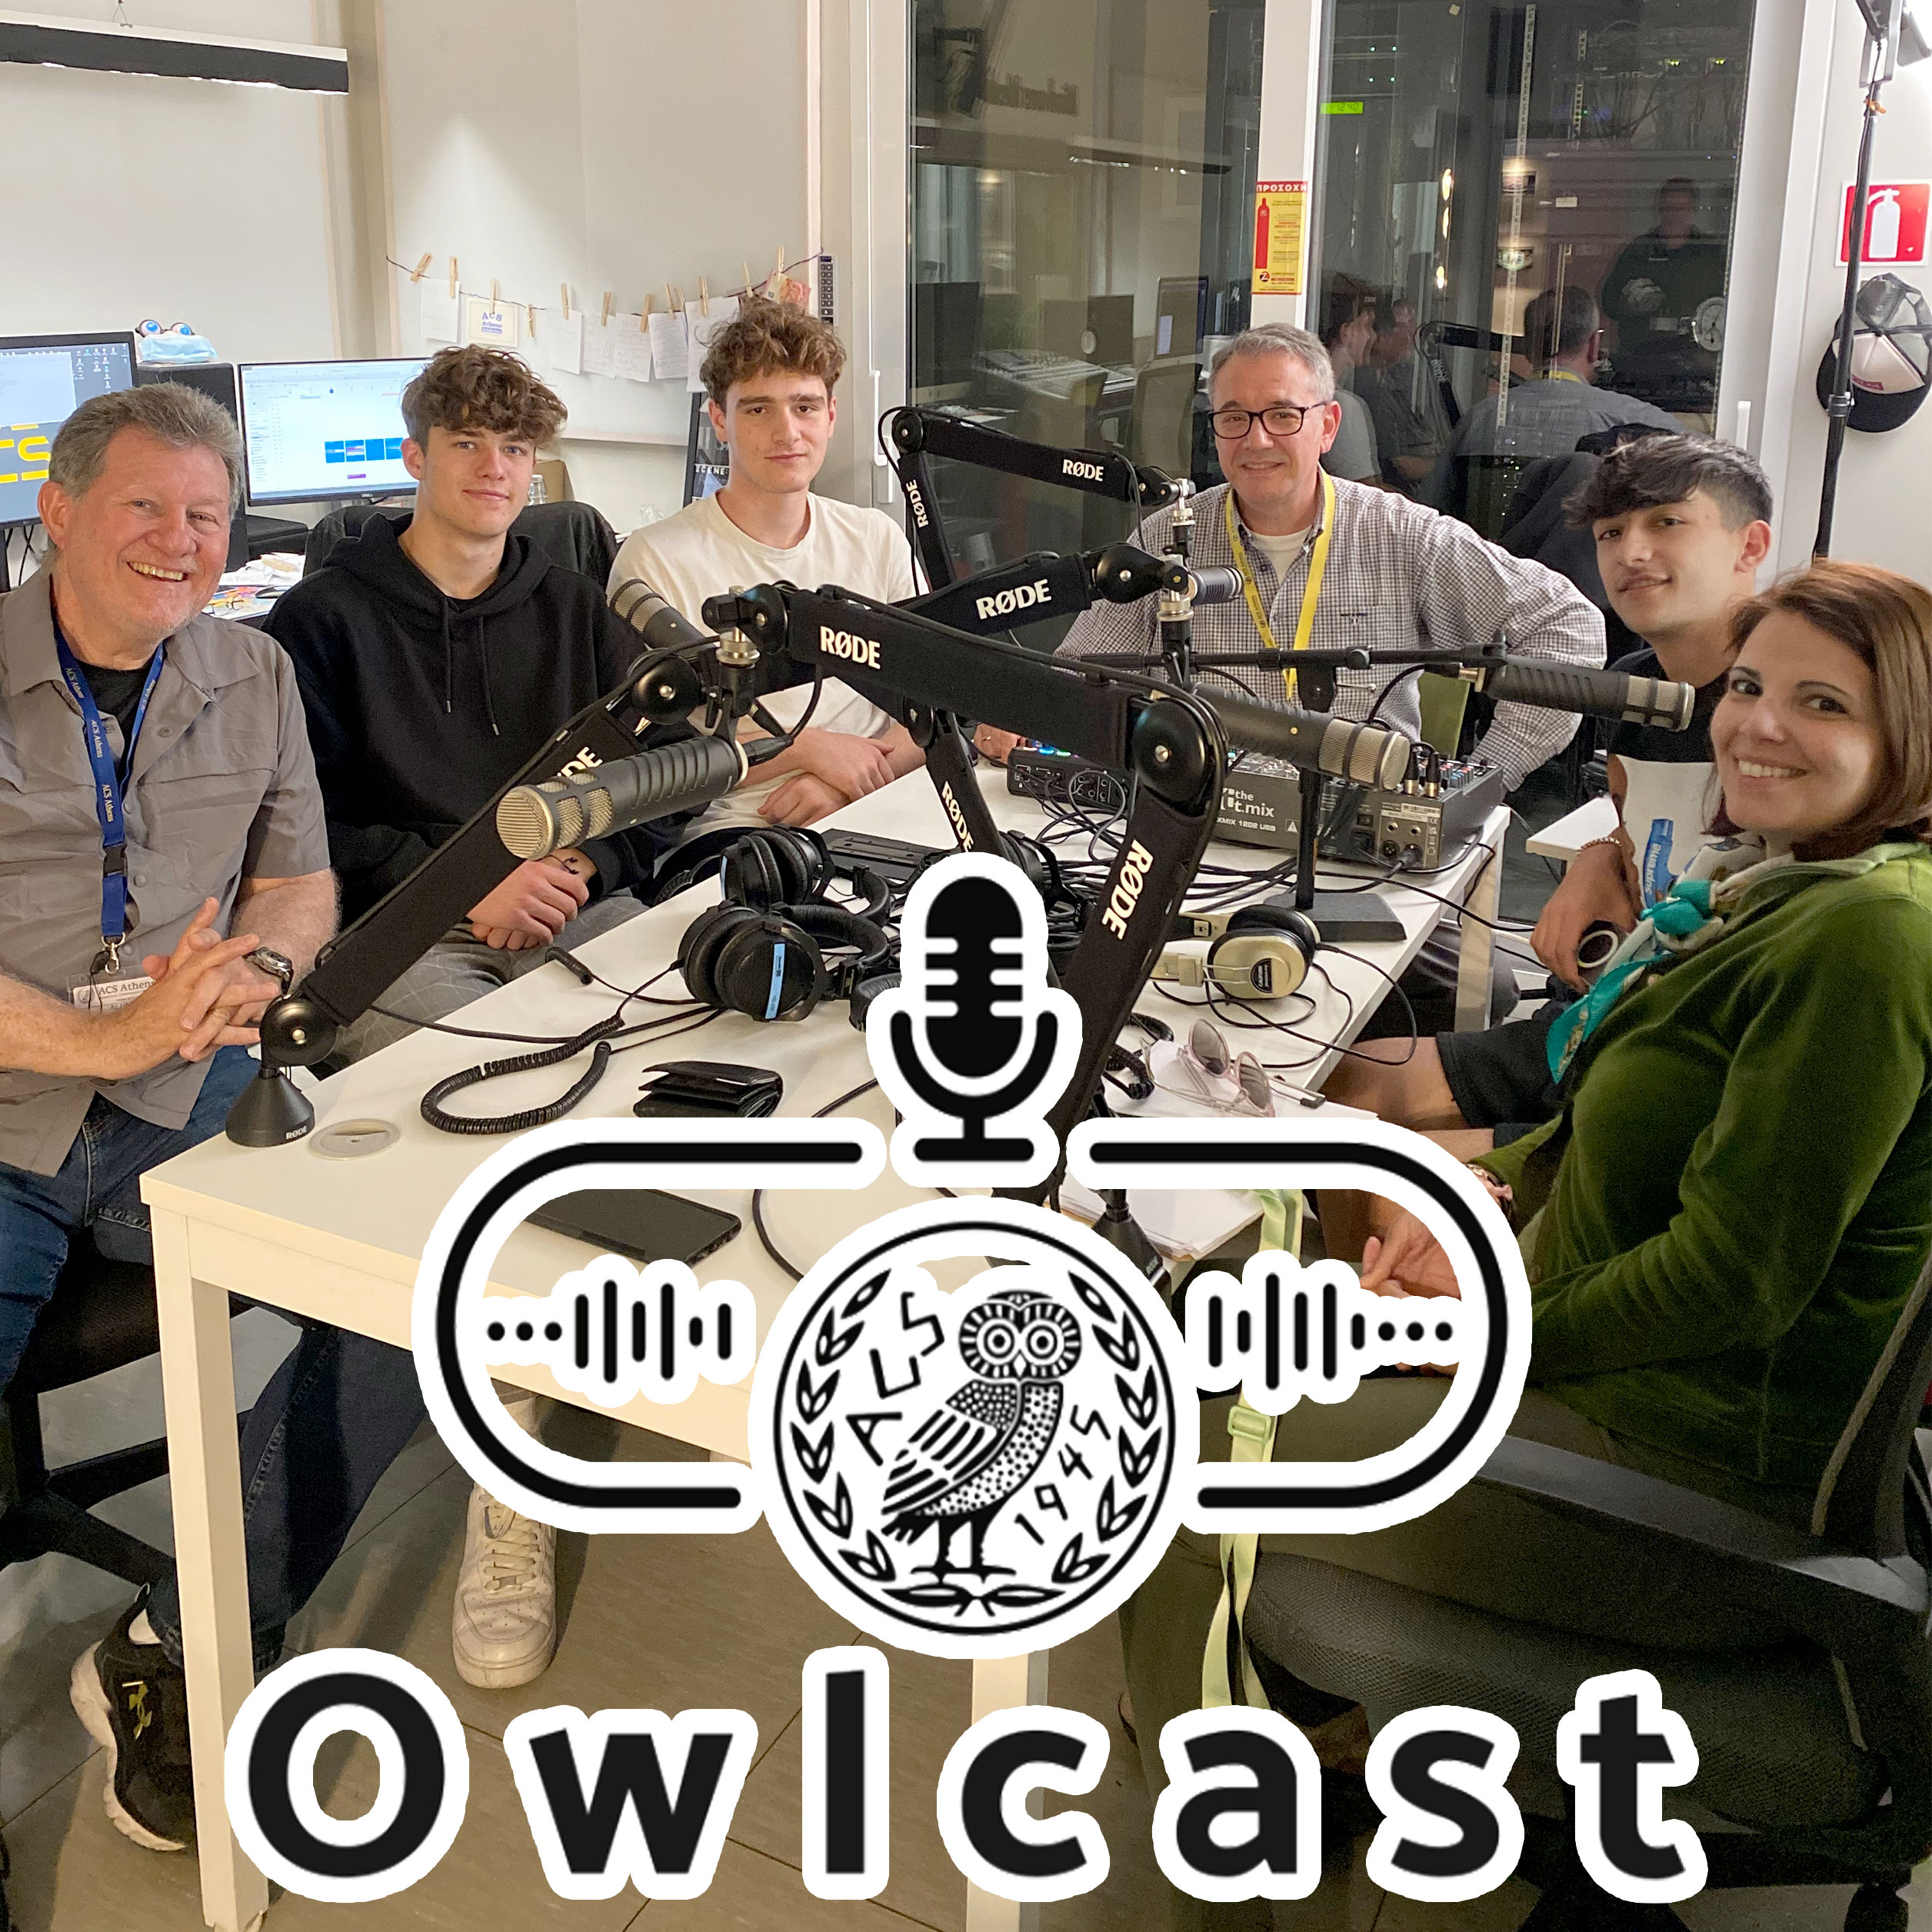 Owlcast 66 - With Chris Snyder, Class of '77 - Alumni Edition